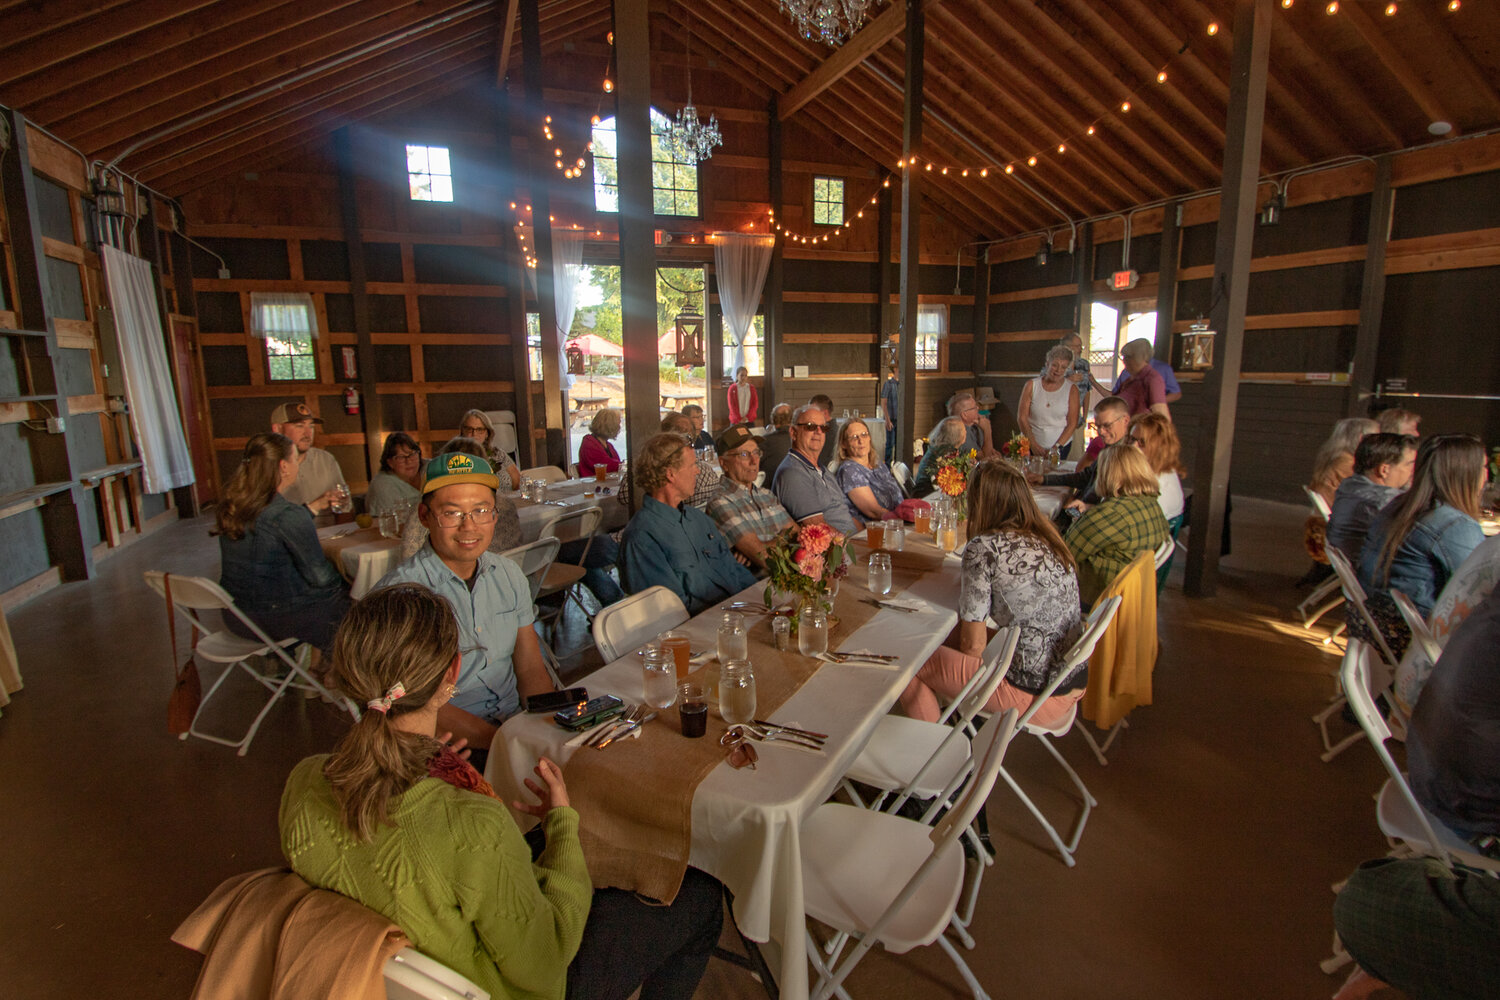 Guests gather at The Mason Jar event center on Sunday, Oct. 8 for the farm to table dinner, the final event of the Onalaska Apple Harvest Festival.